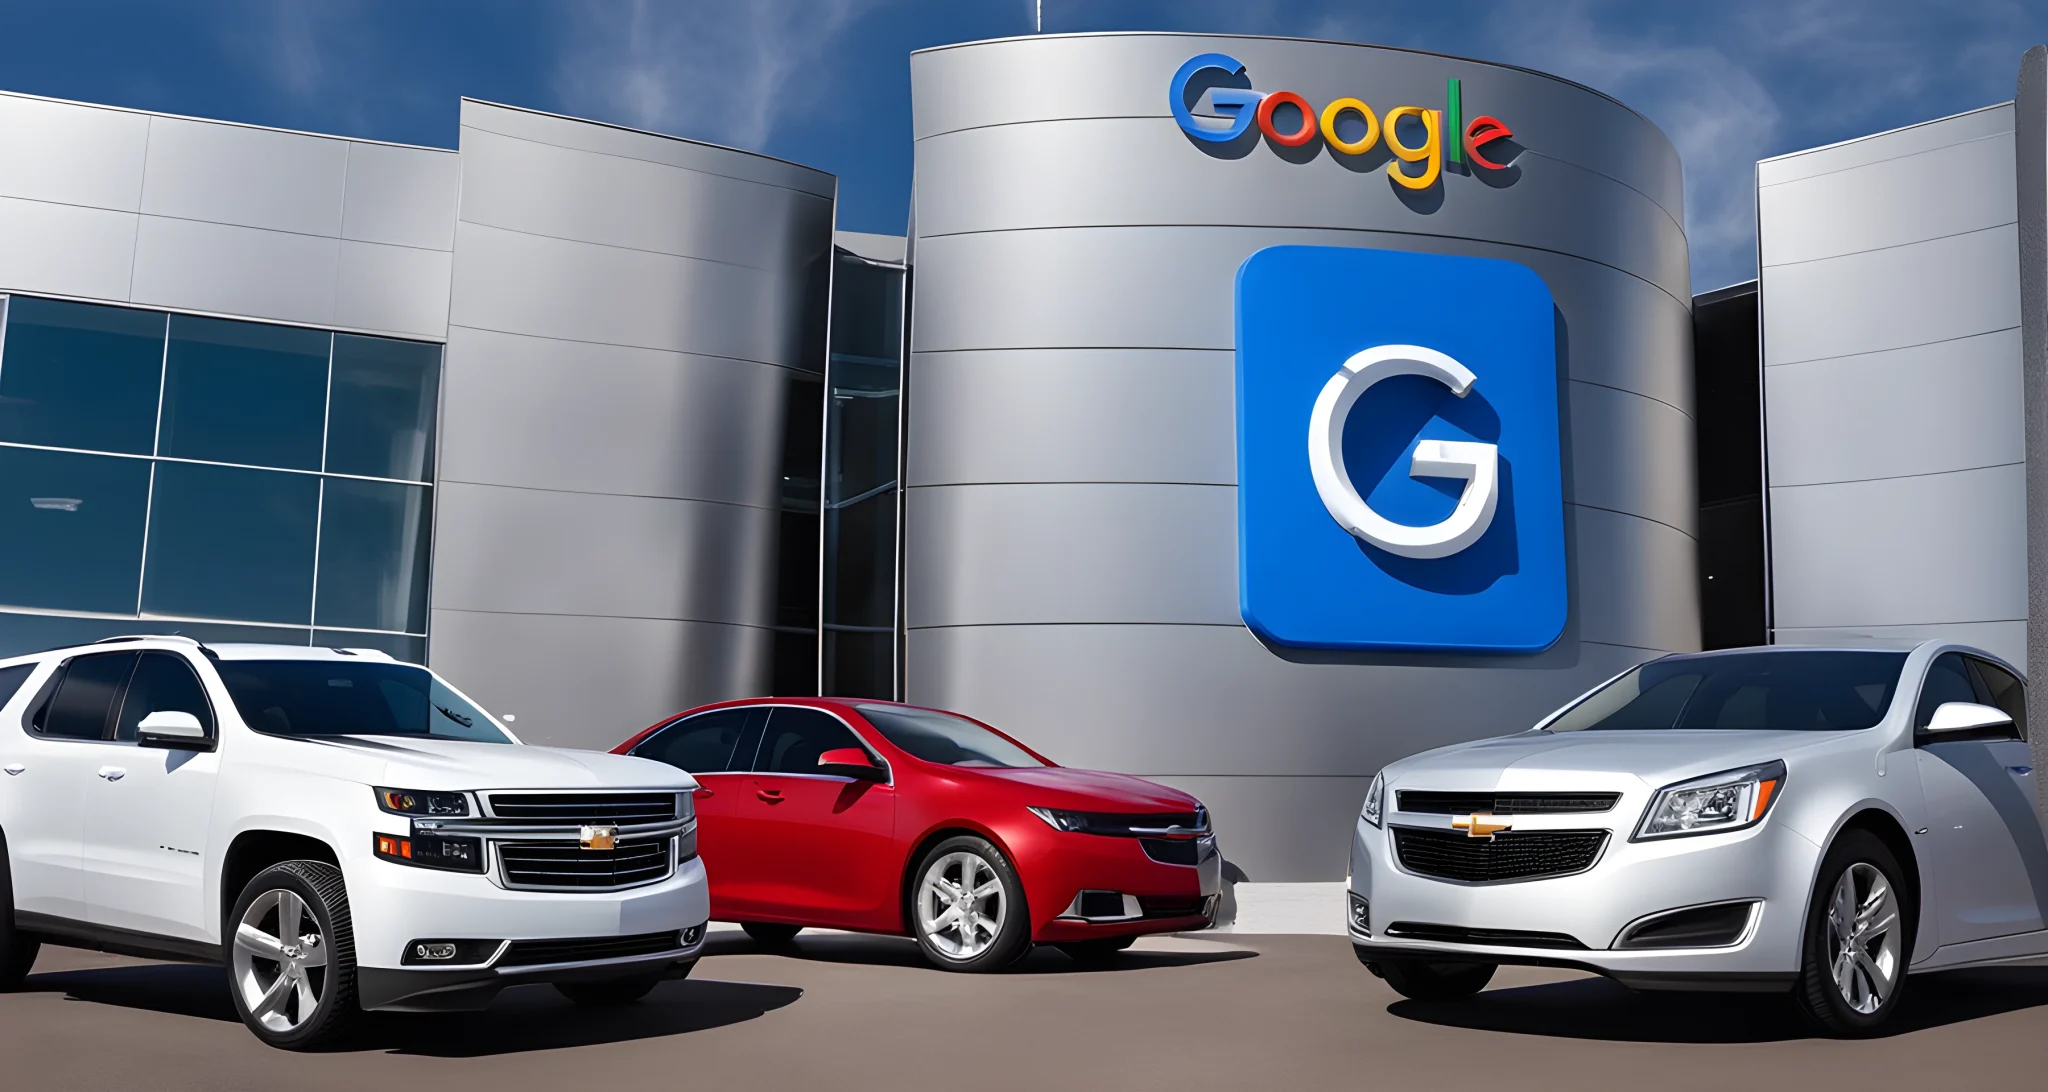 The image shows the logos of General Motors and Google Cloud, symbolizing their partnership for OnStar services.